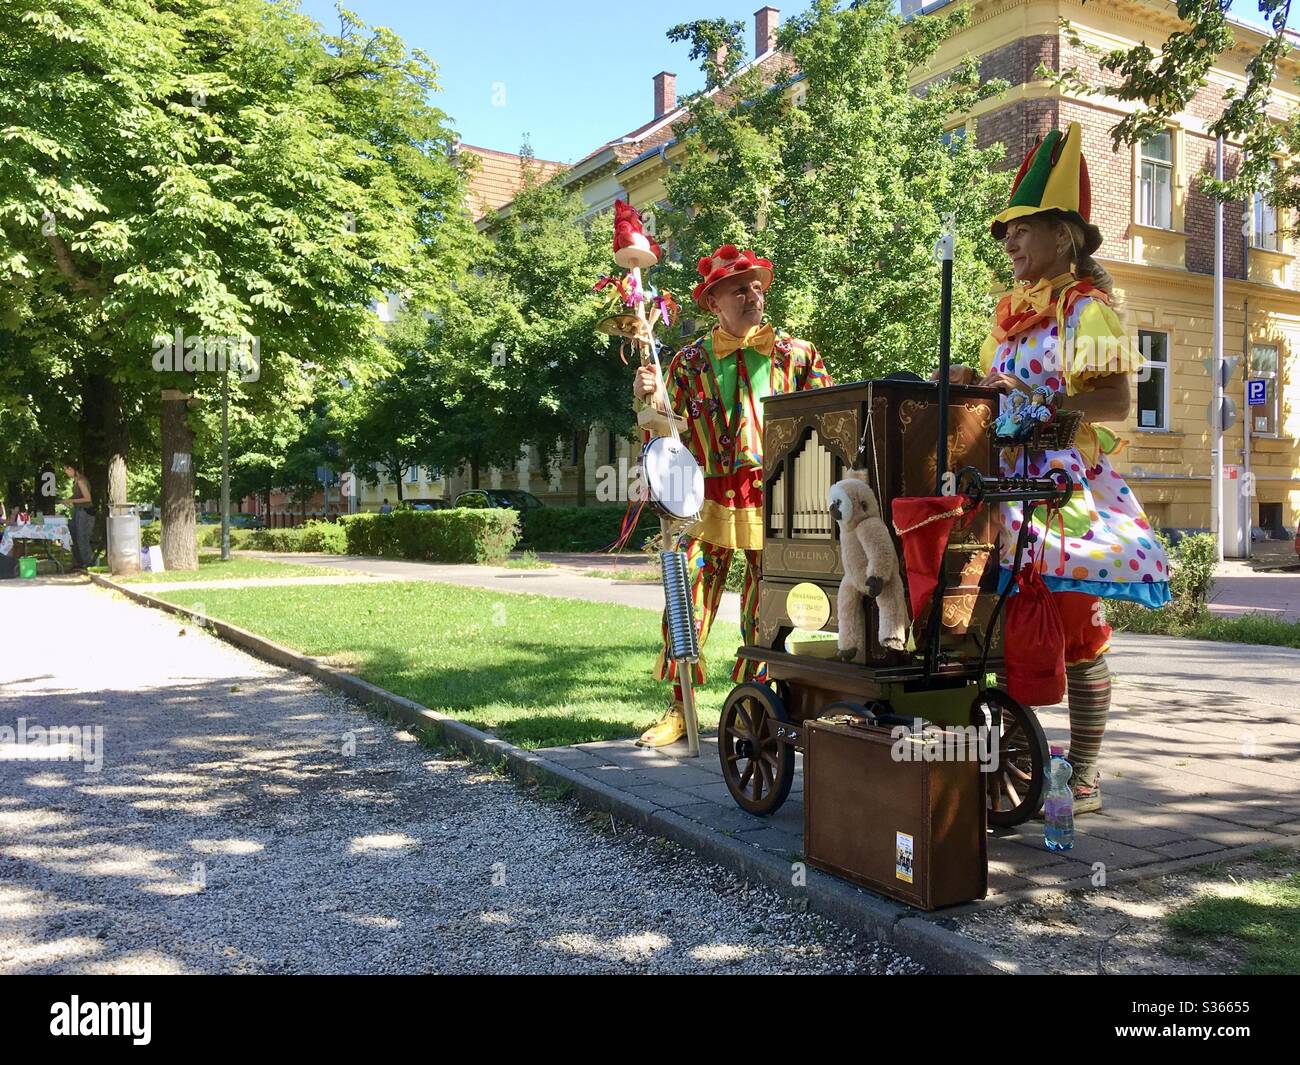 Maria and Alexander, two street musicians playing a Deleika barrel organ dressed like clowns, Sopron, Hungary Stock Photo